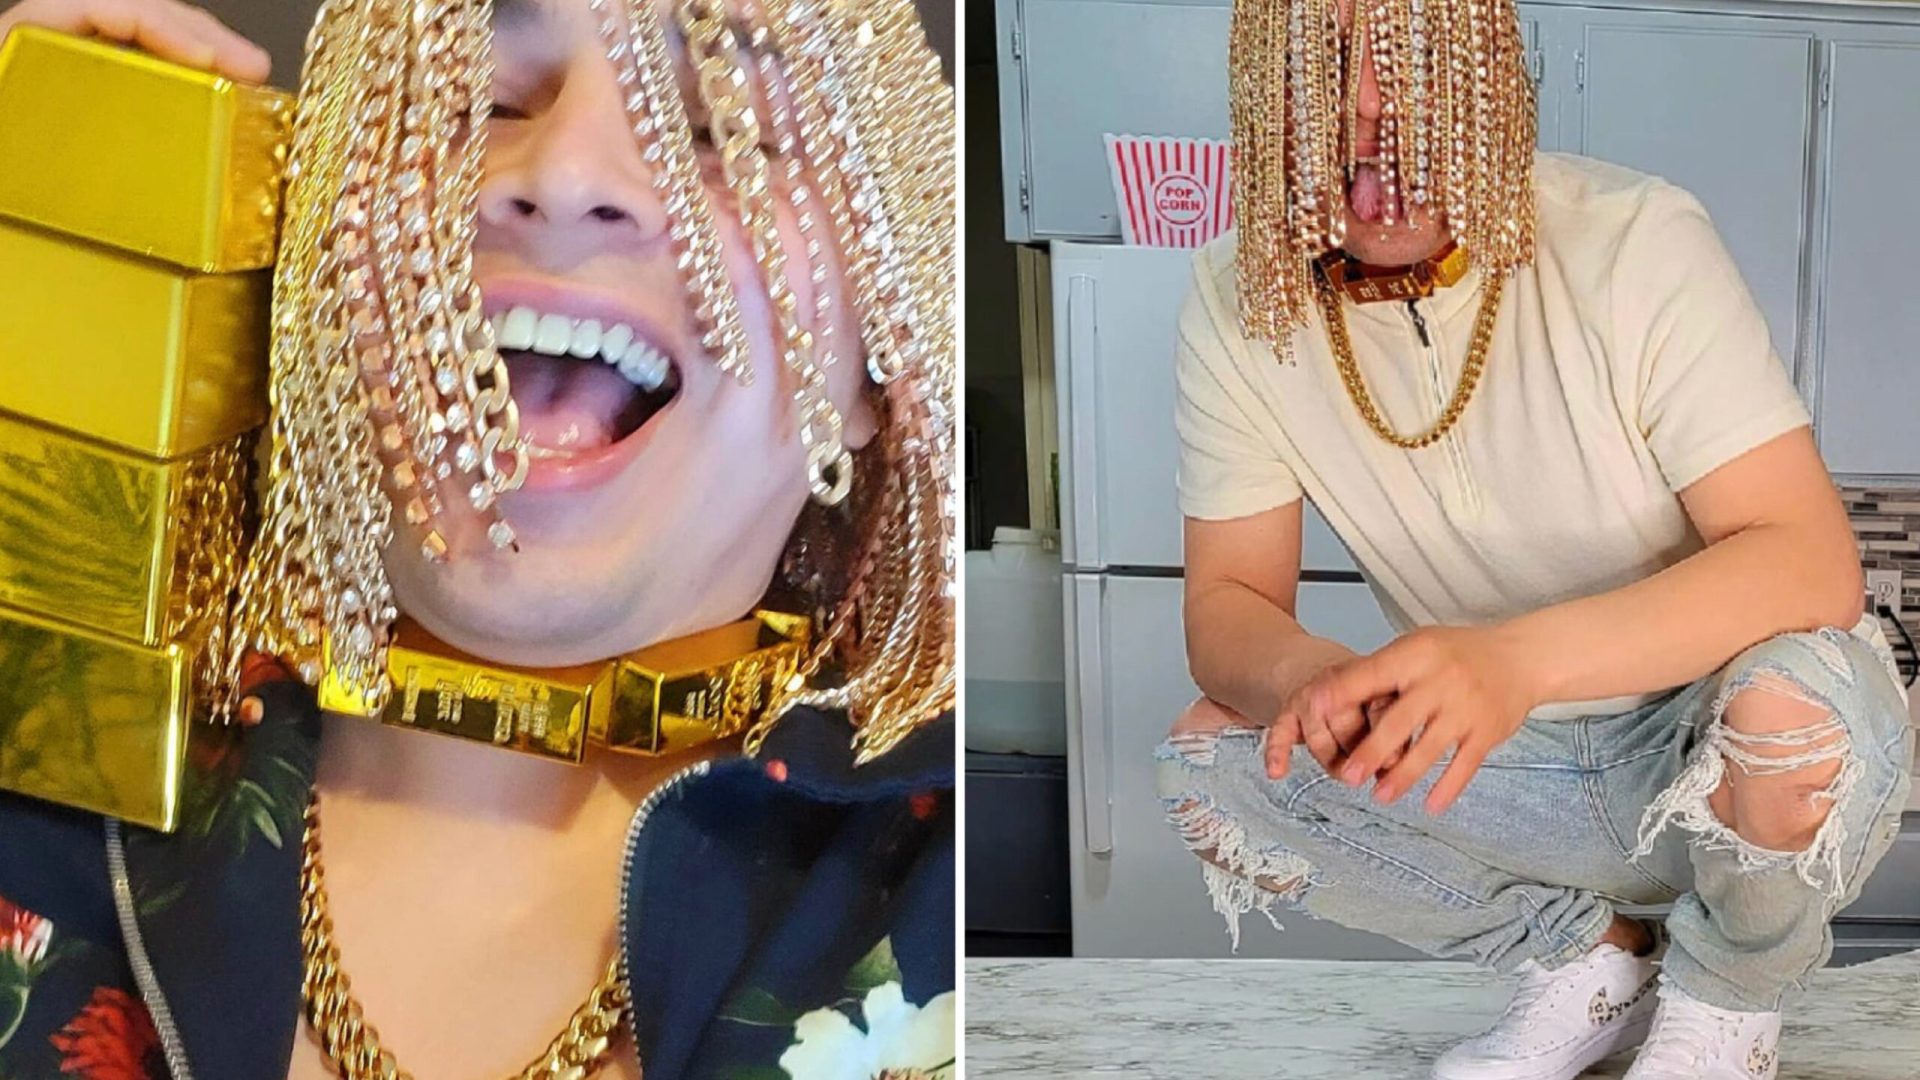 Rapper changes his hair for gold chains We need a purge  9GAG